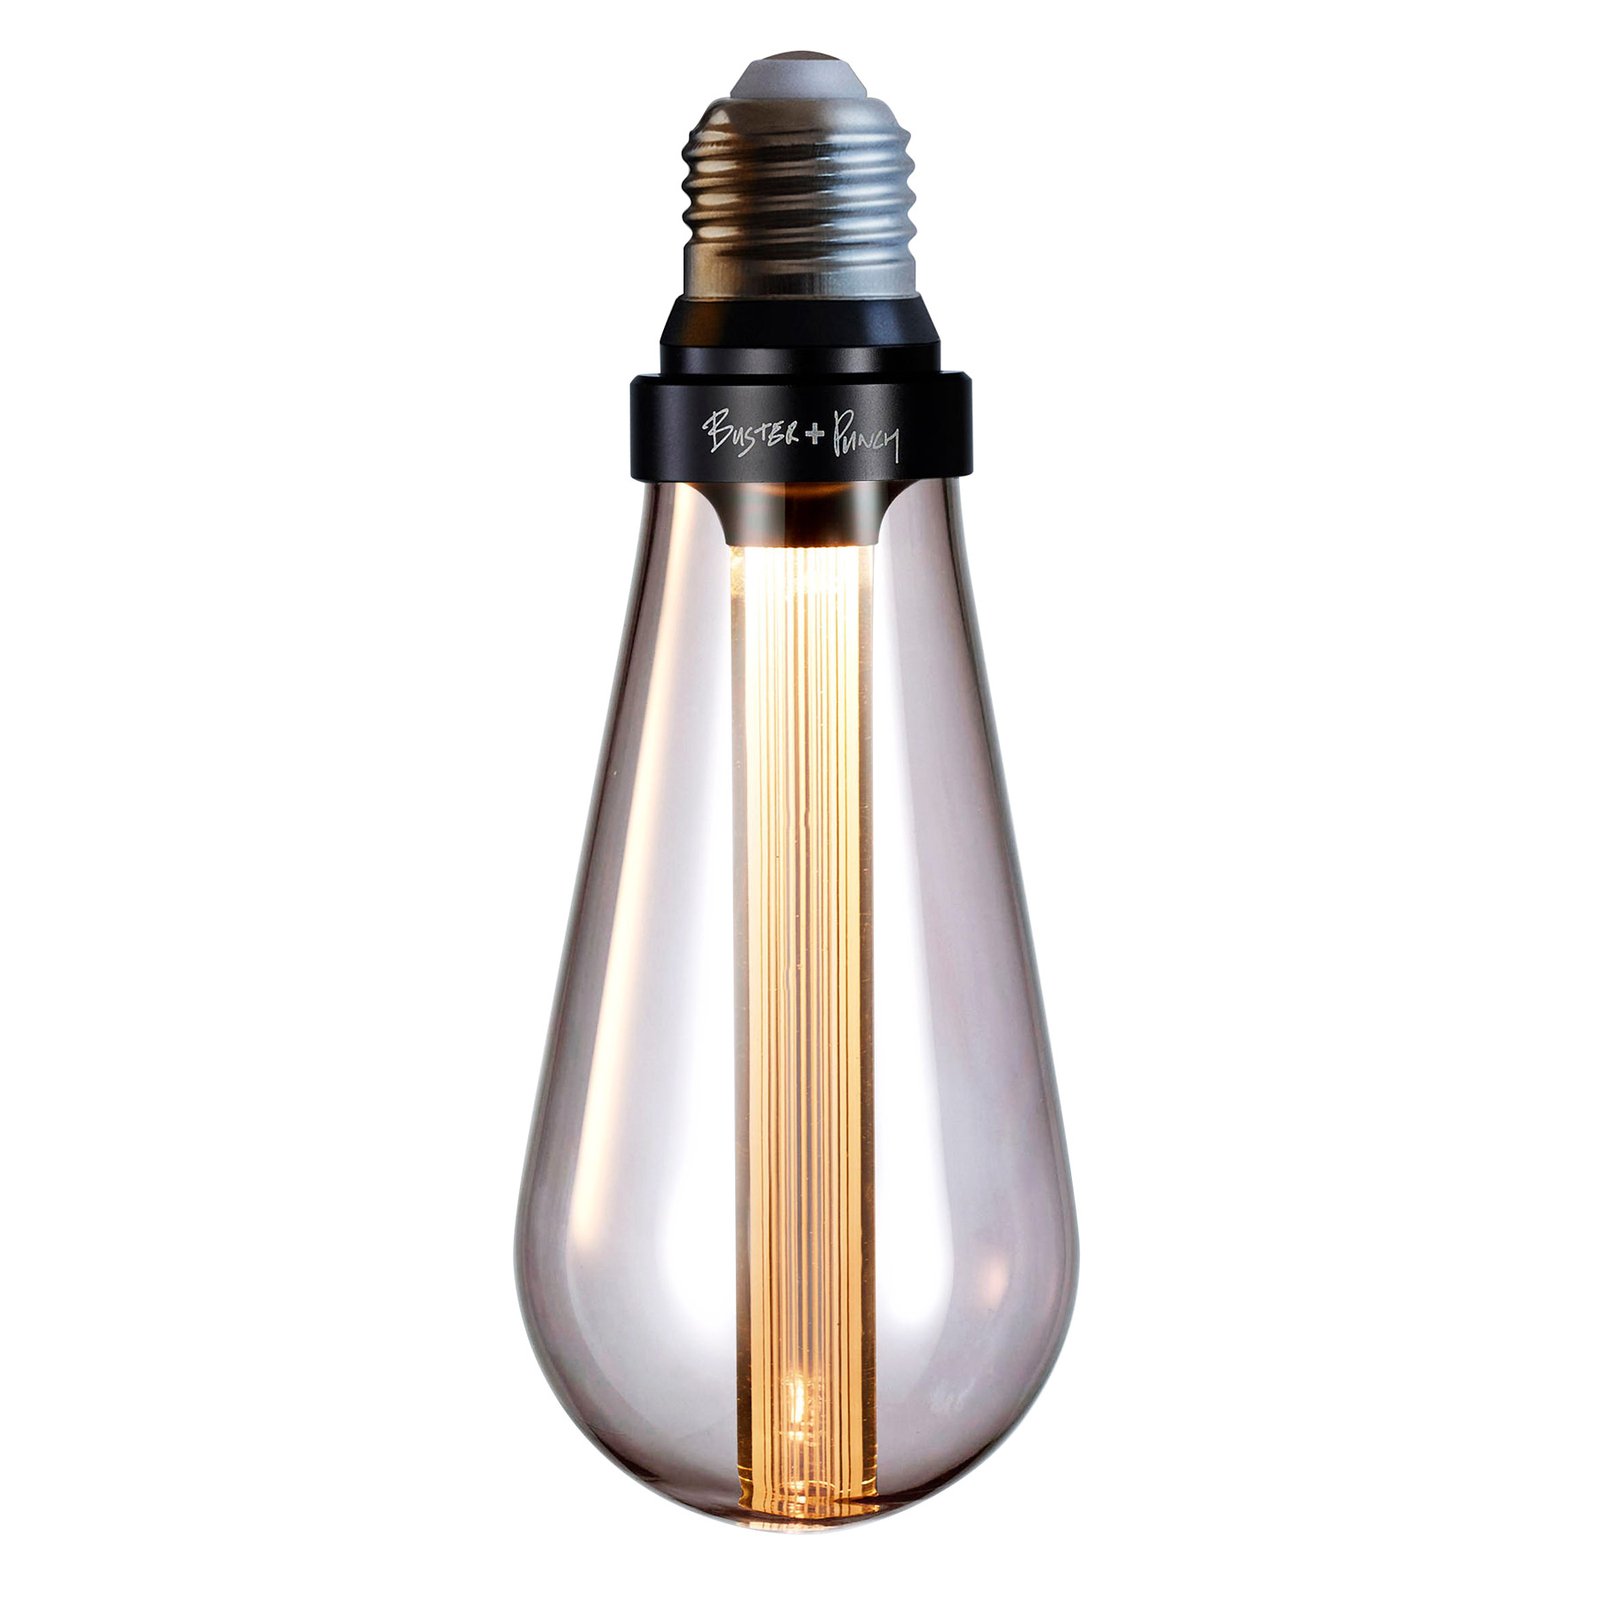 Buster + Punch LED bulb E27 2W dimmable smoked